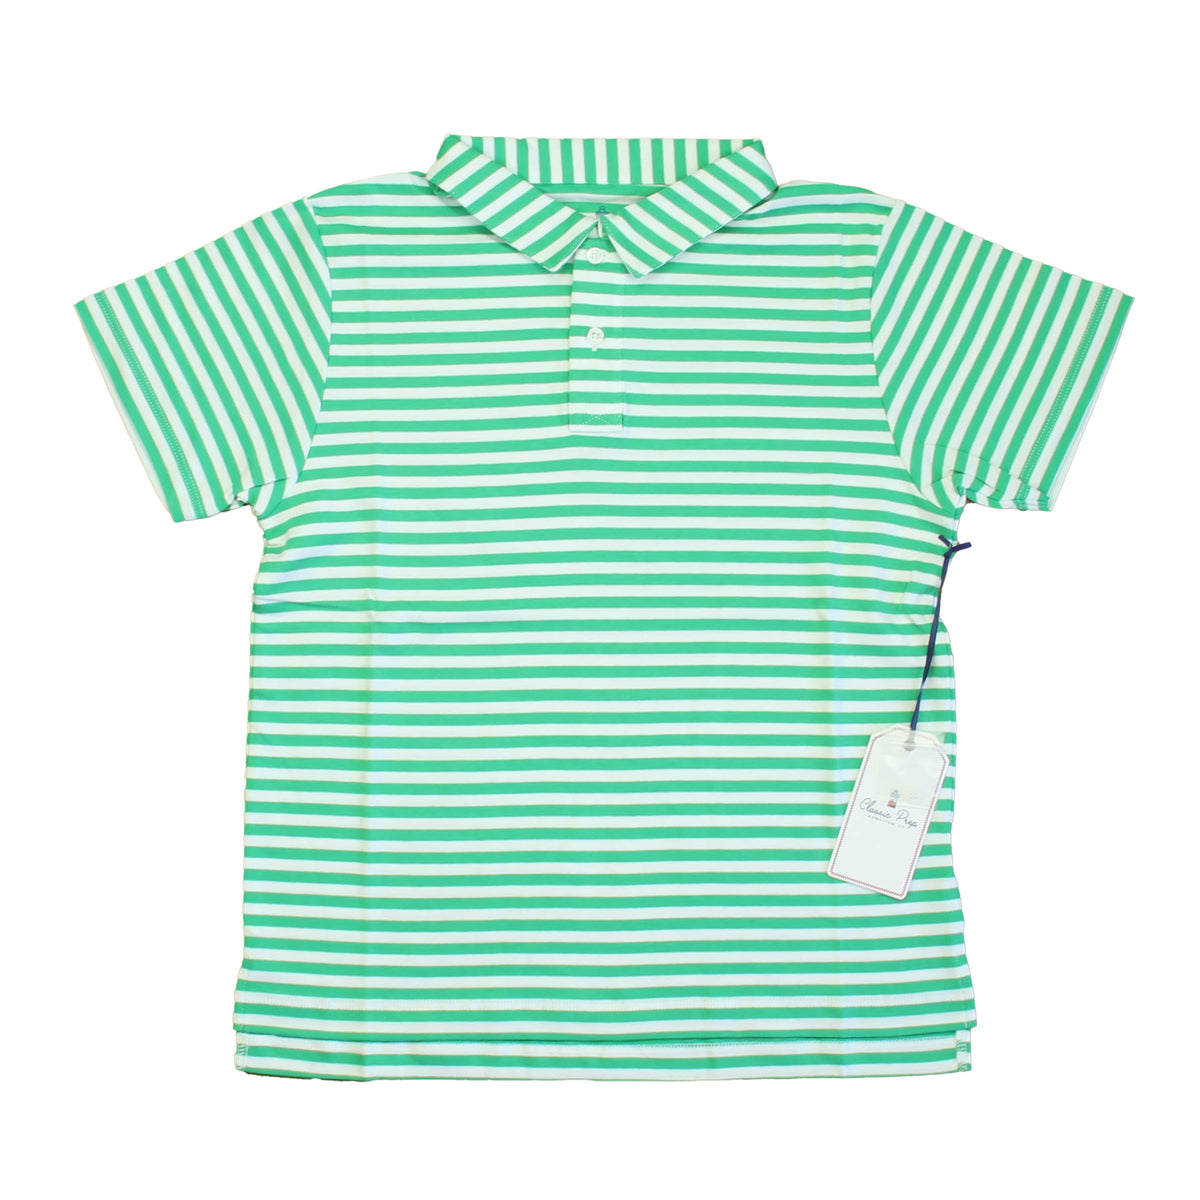 New with Tags: Blarney | Bright White Top size: 6-14 Years -- FINAL SALE